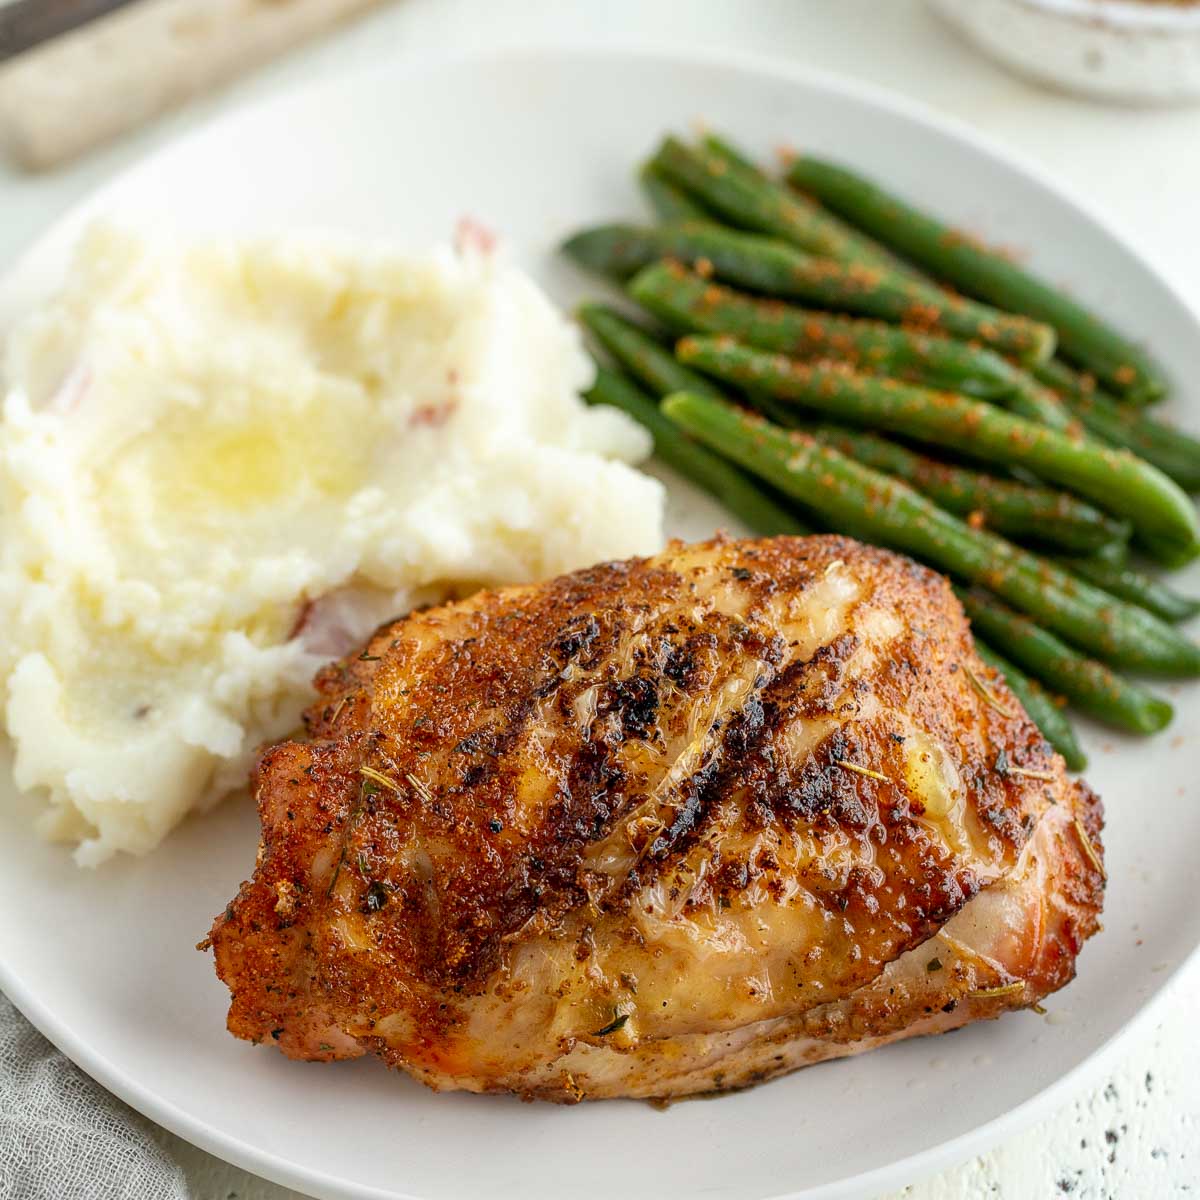 A grilled chicken breast on a white plate with mashed potatoes and green beans.